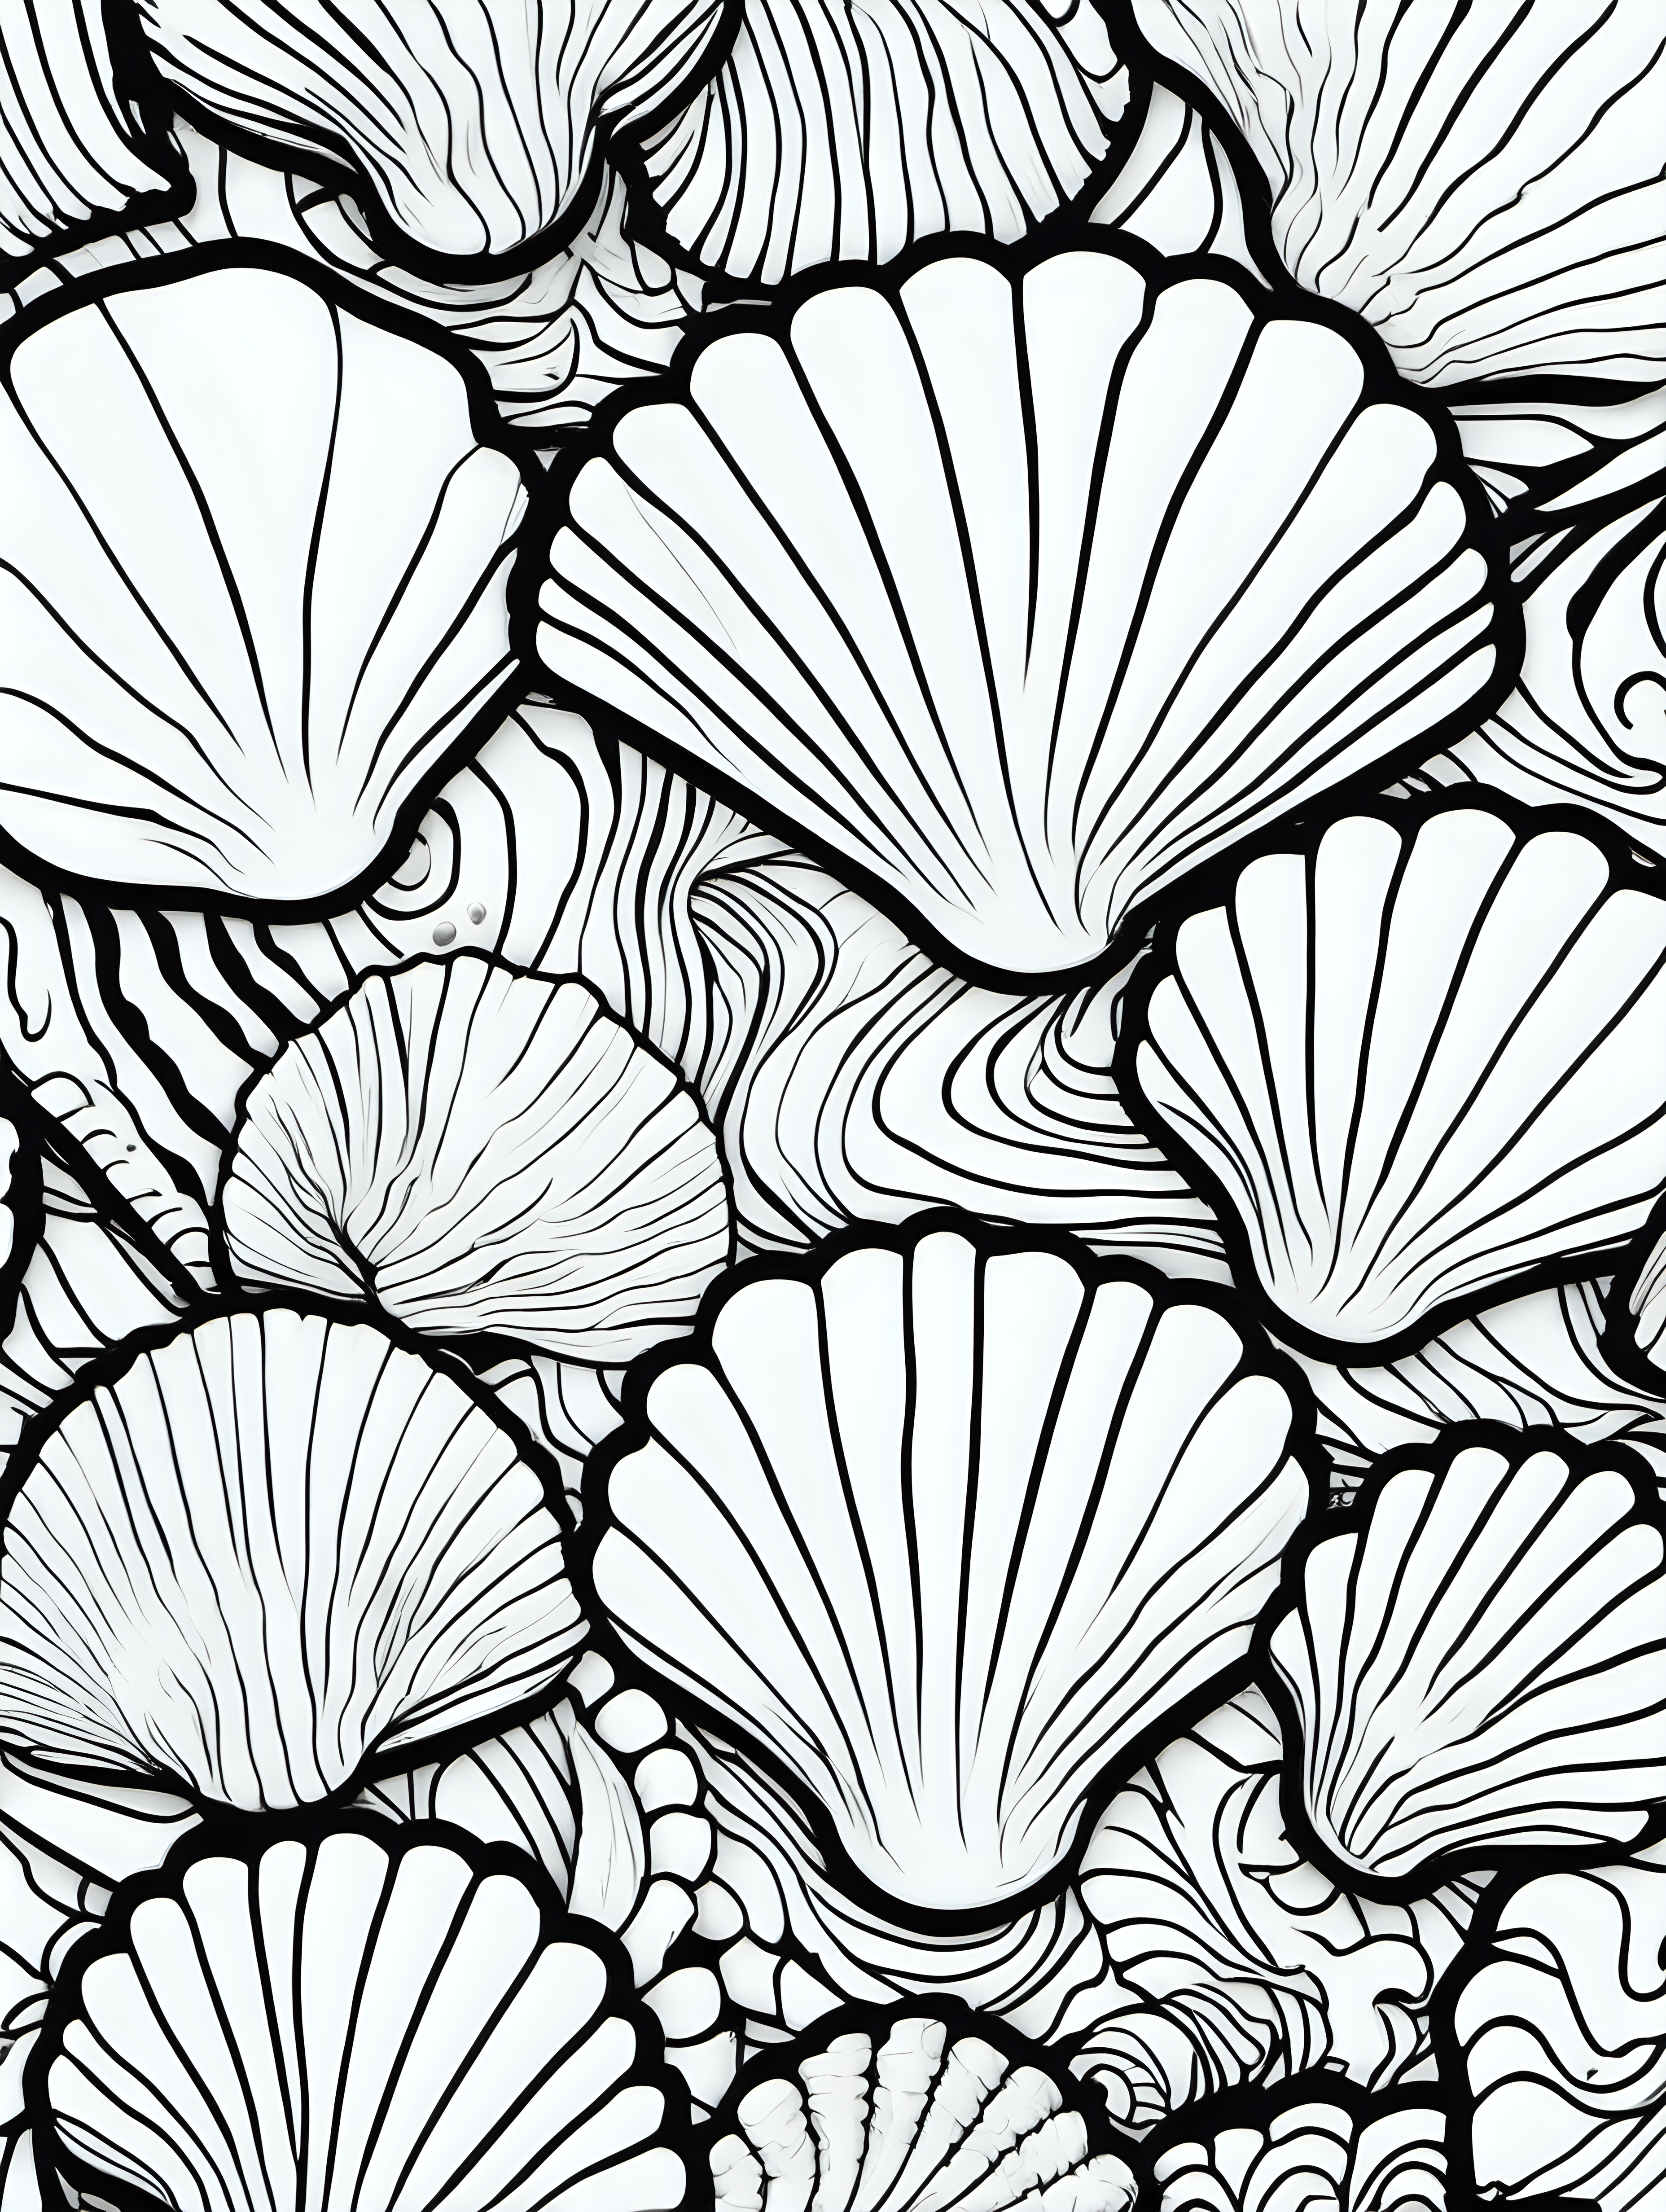 seashells abstract ,coloring page, simple draw, no colors, abstract background